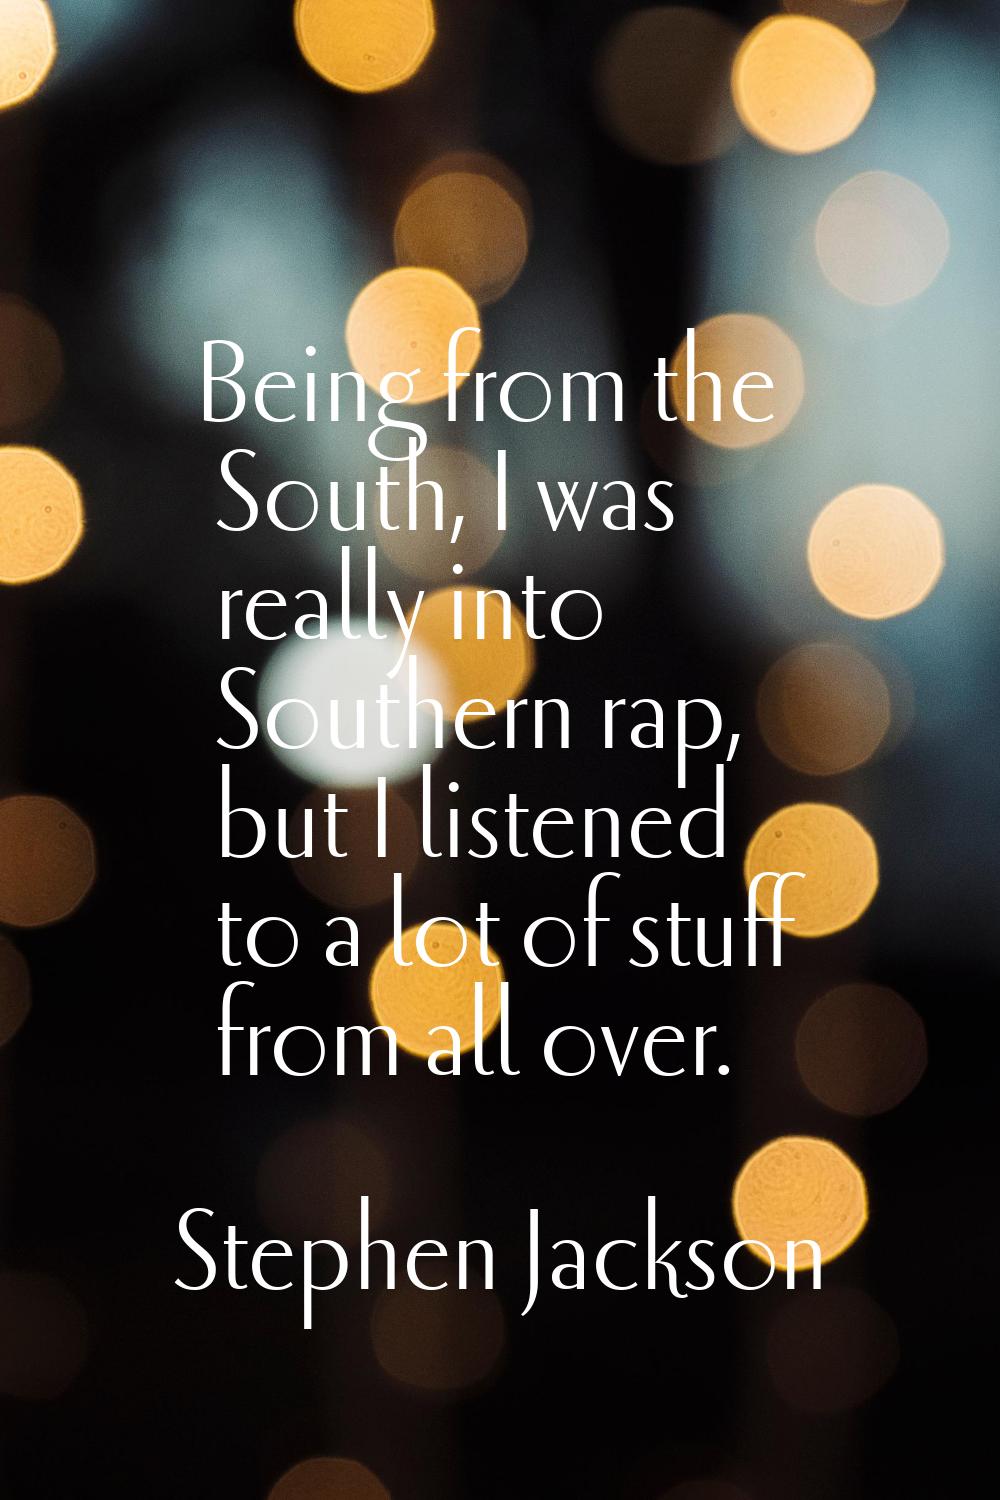 Being from the South, I was really into Southern rap, but I listened to a lot of stuff from all ove